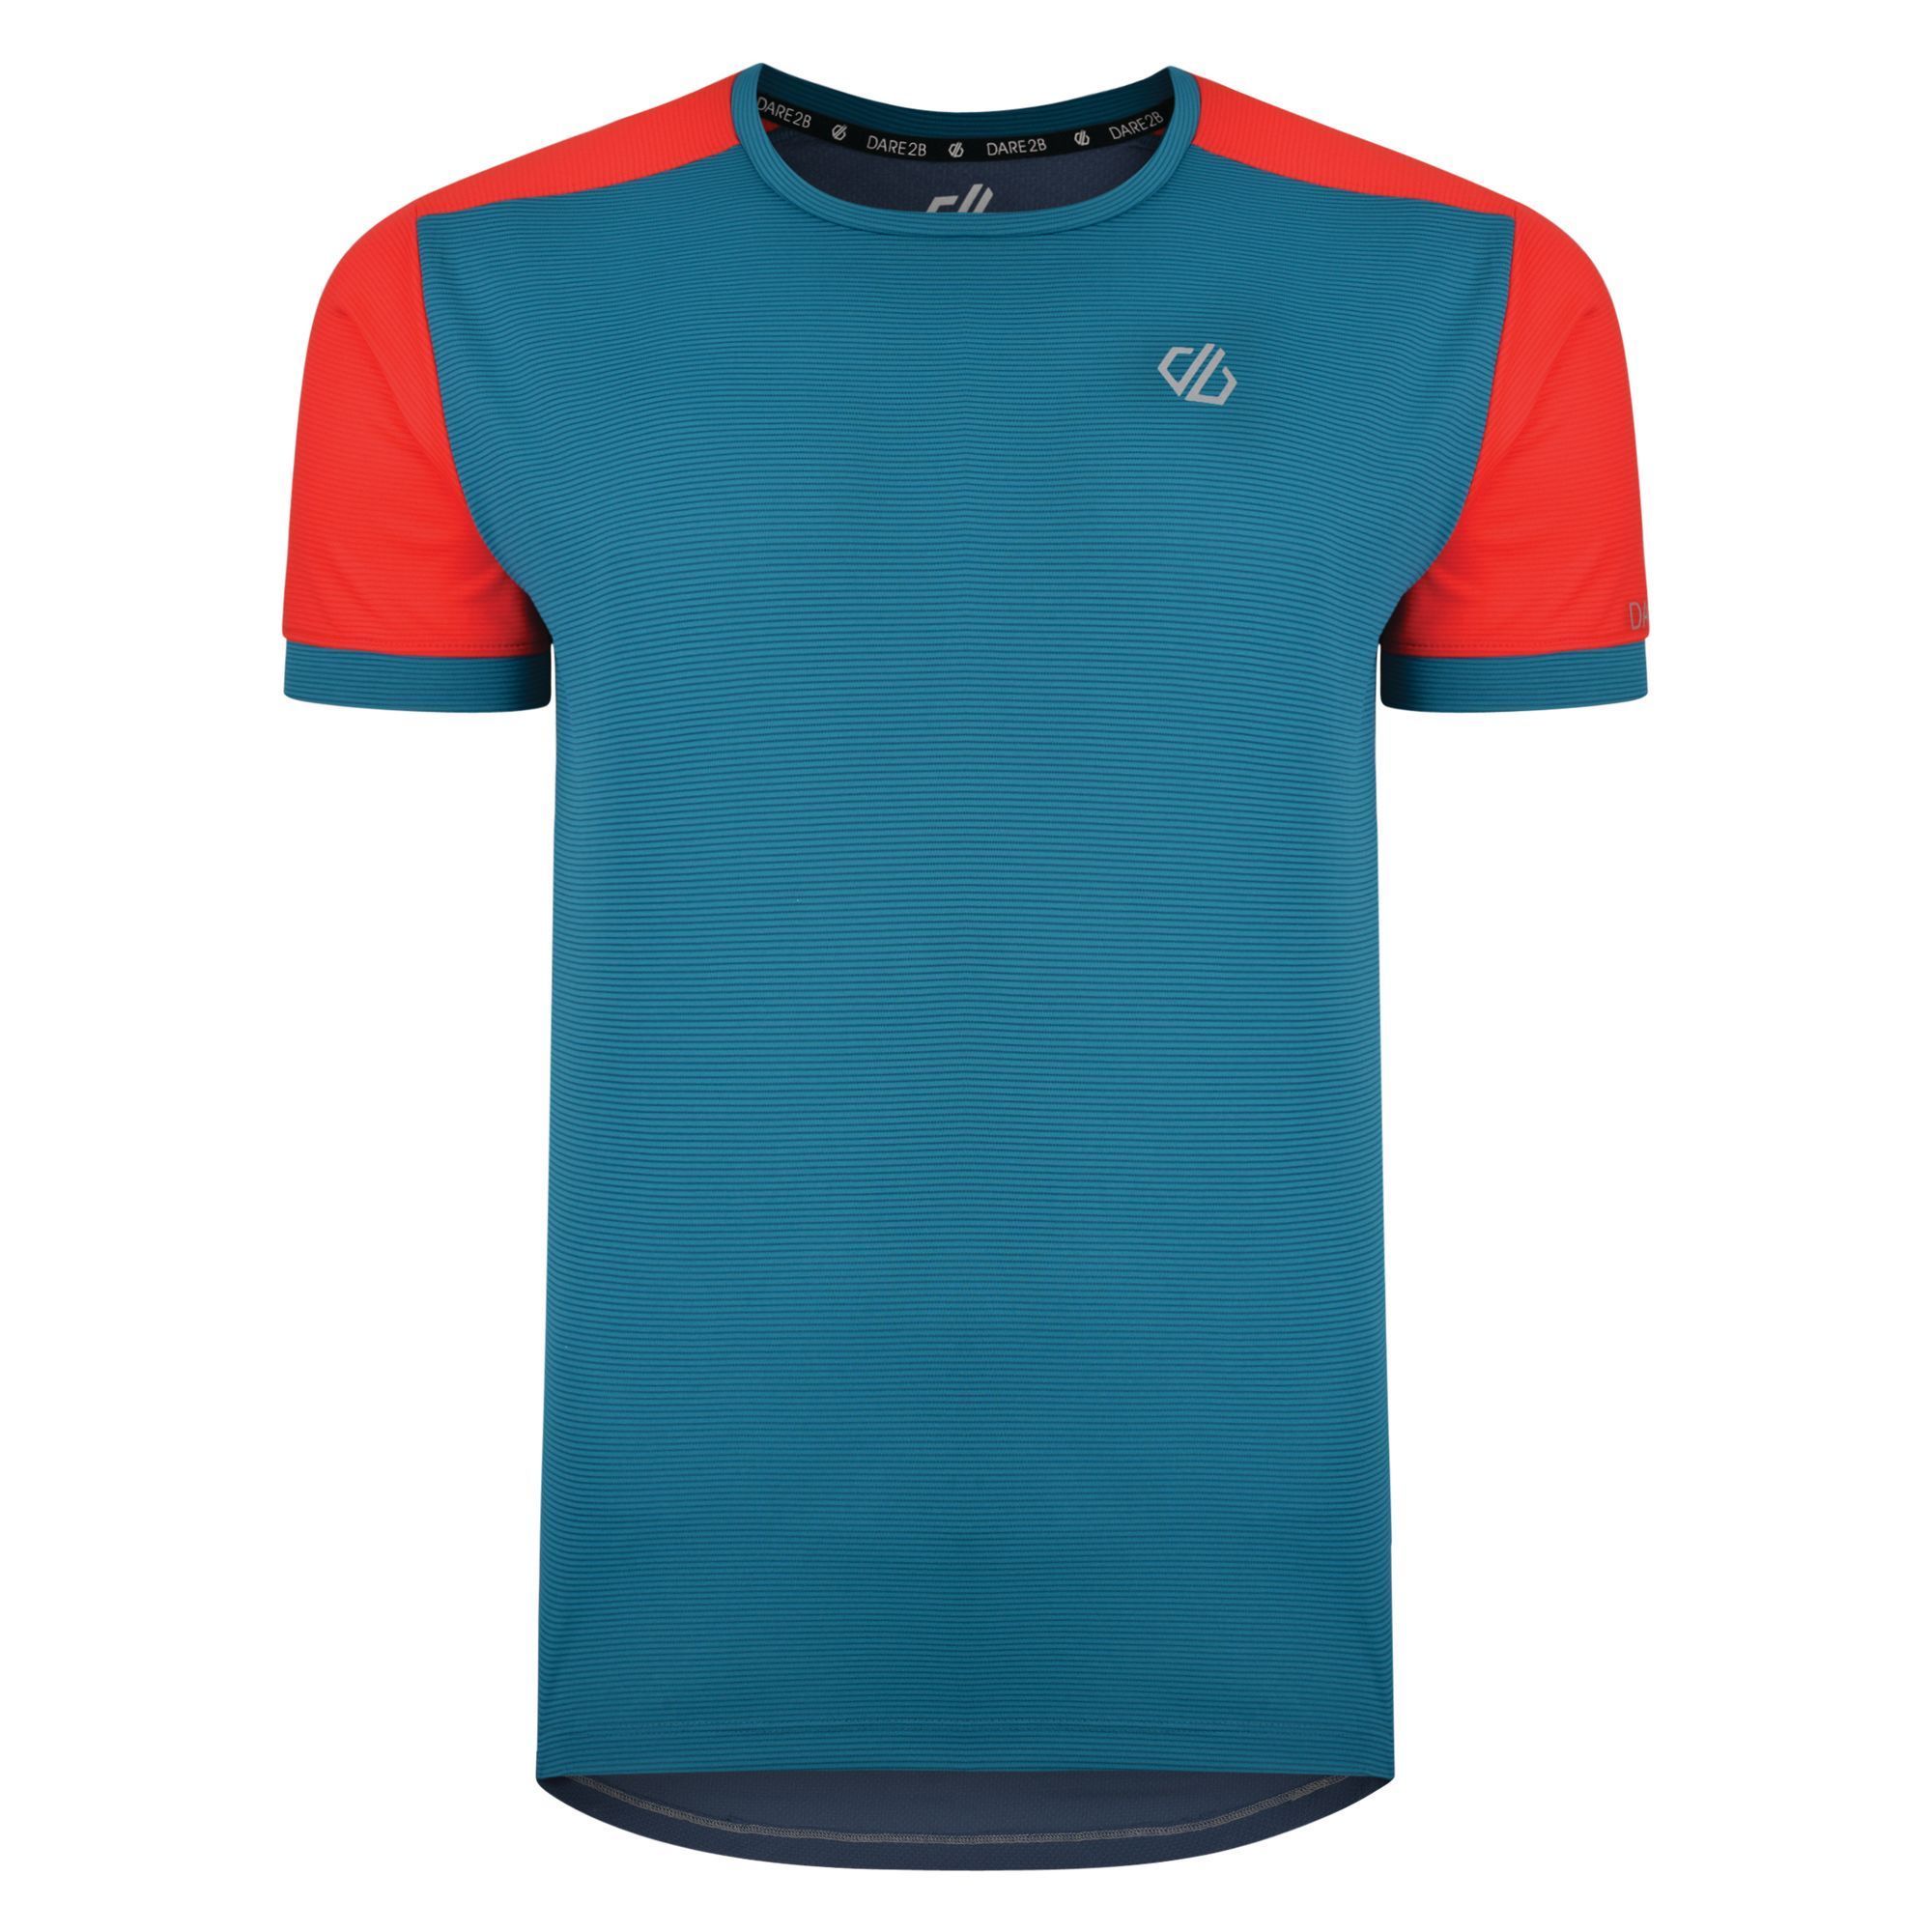 100% polyester.  odour control treatment. Good wicking performance. Quick drying. Full mesh back ventilation. Reflective detail for enhanced visibility. Round neck.